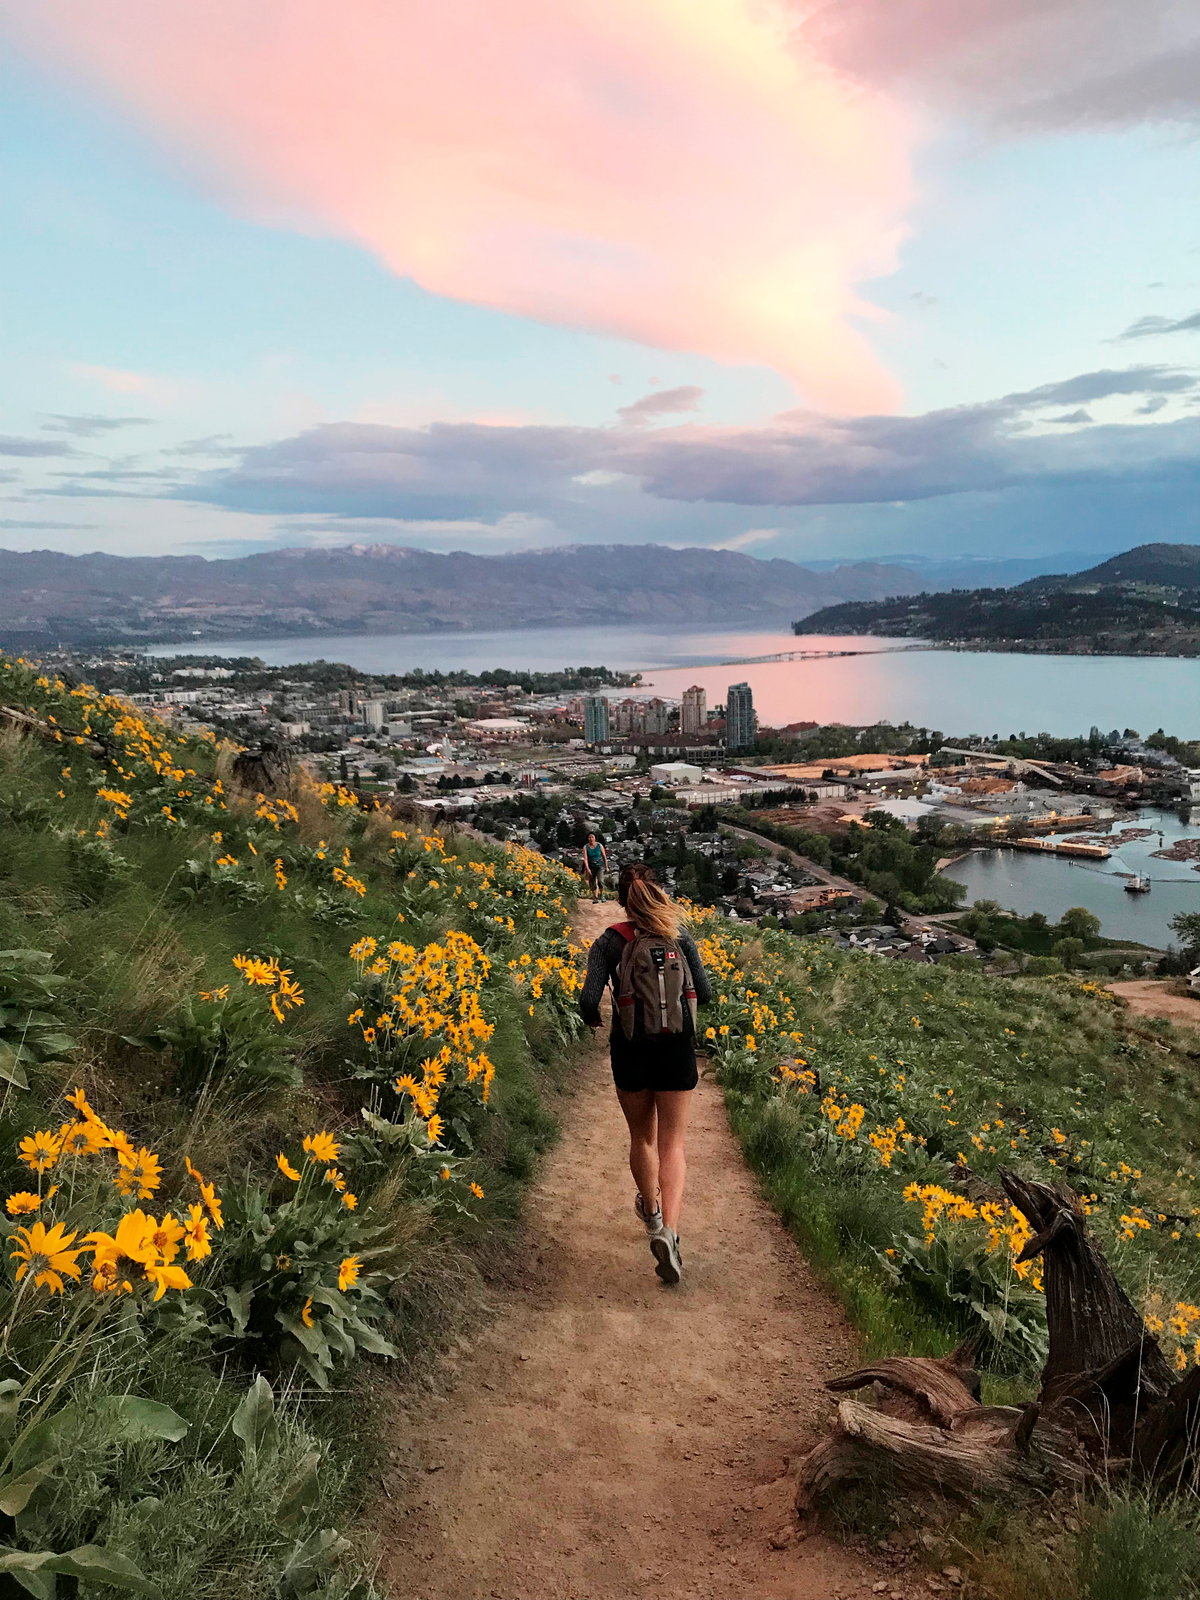 Person jogging on a path in Knox Mountain Park on a trail between yellow flowers. The town of Kelowna and the lake is seen in the distance. The clouds are lit up pink as the sun sets.